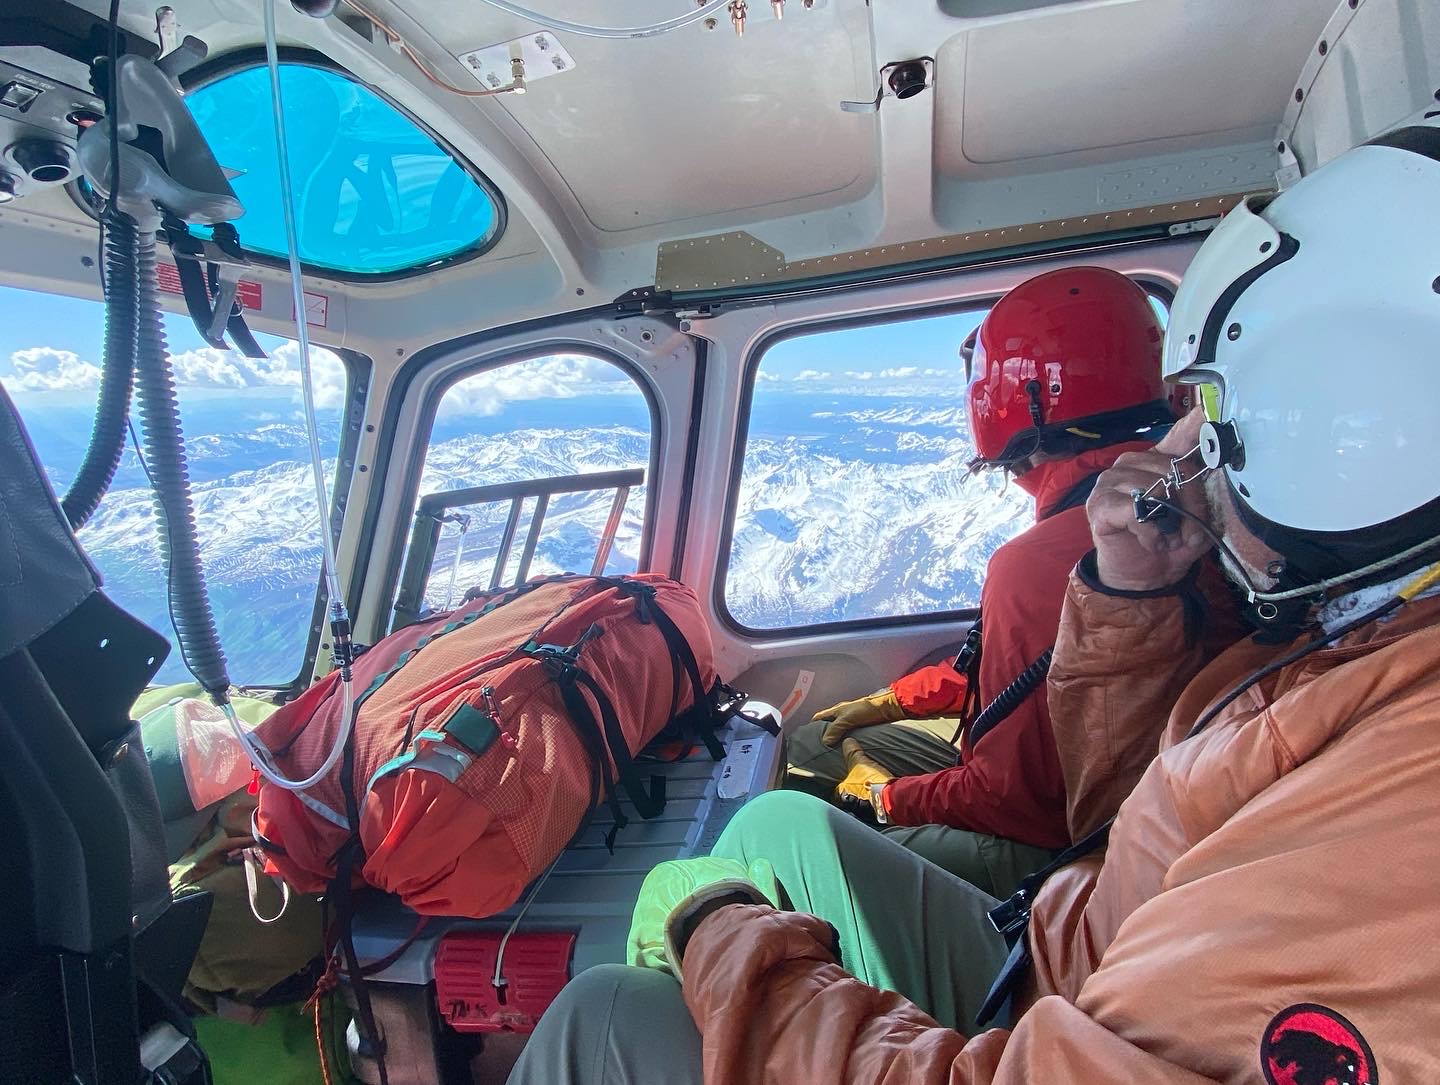 Two climbers look out a helicopter window to mountains below